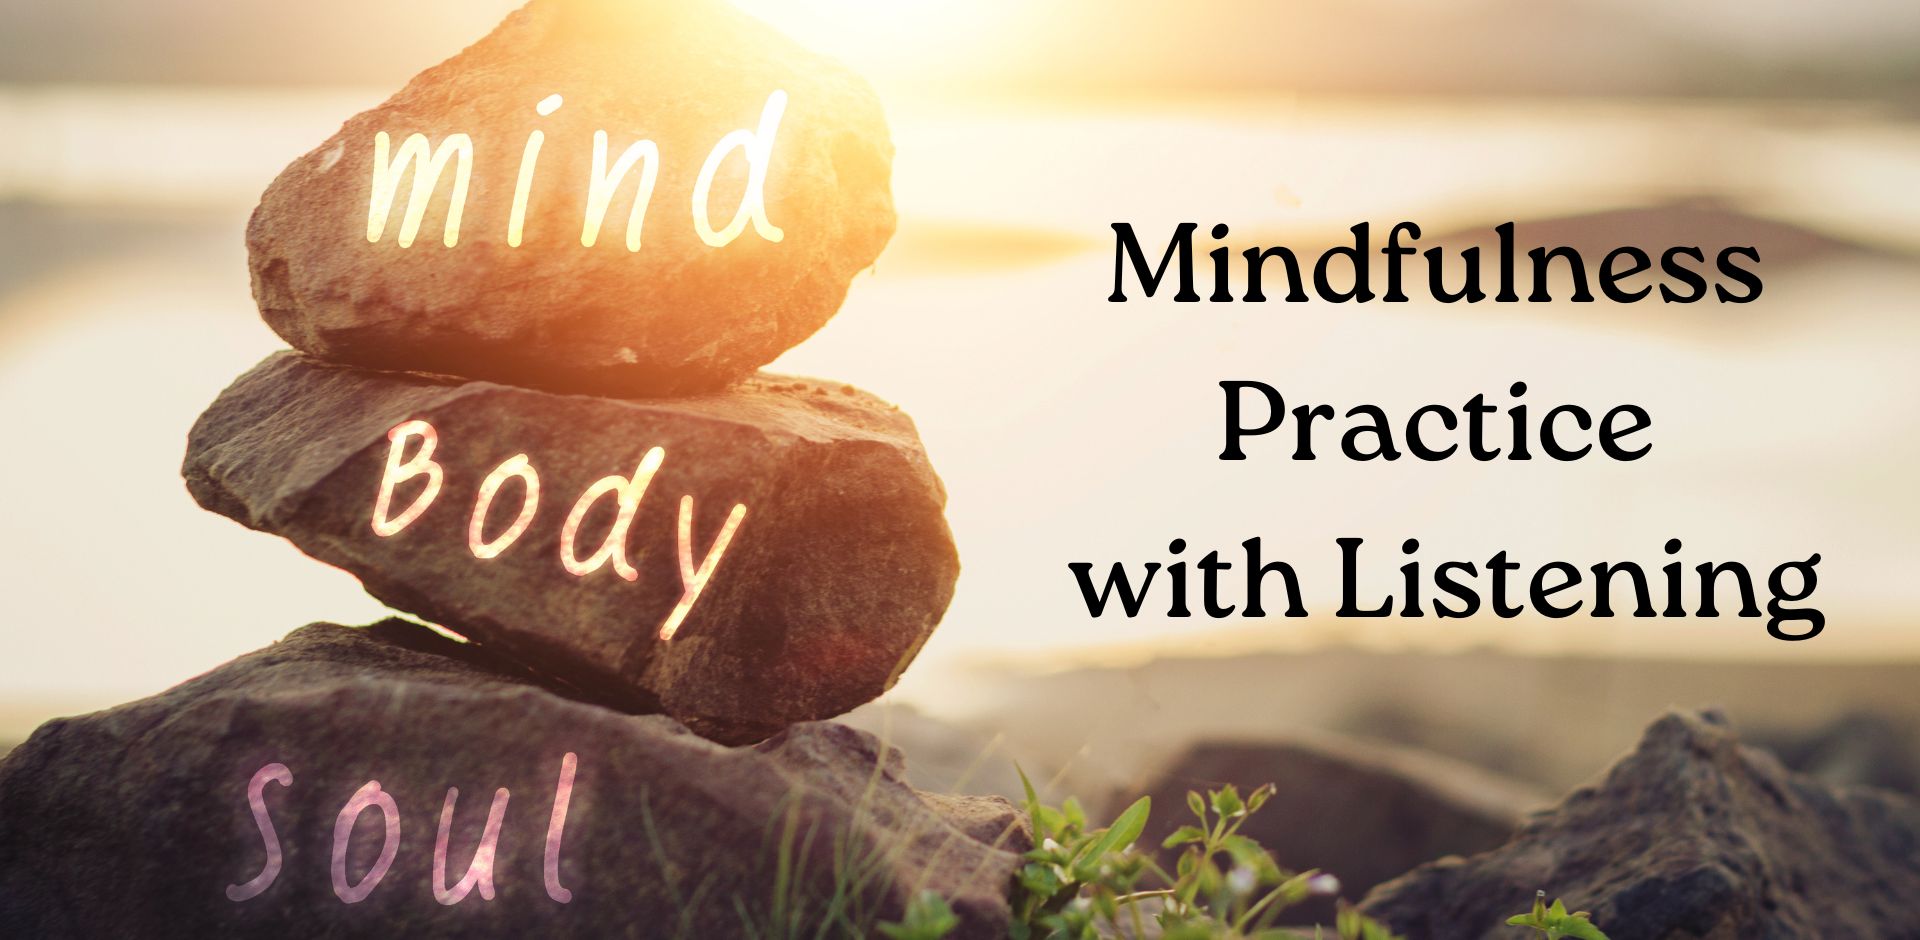 Mindfulness Practice with Listening